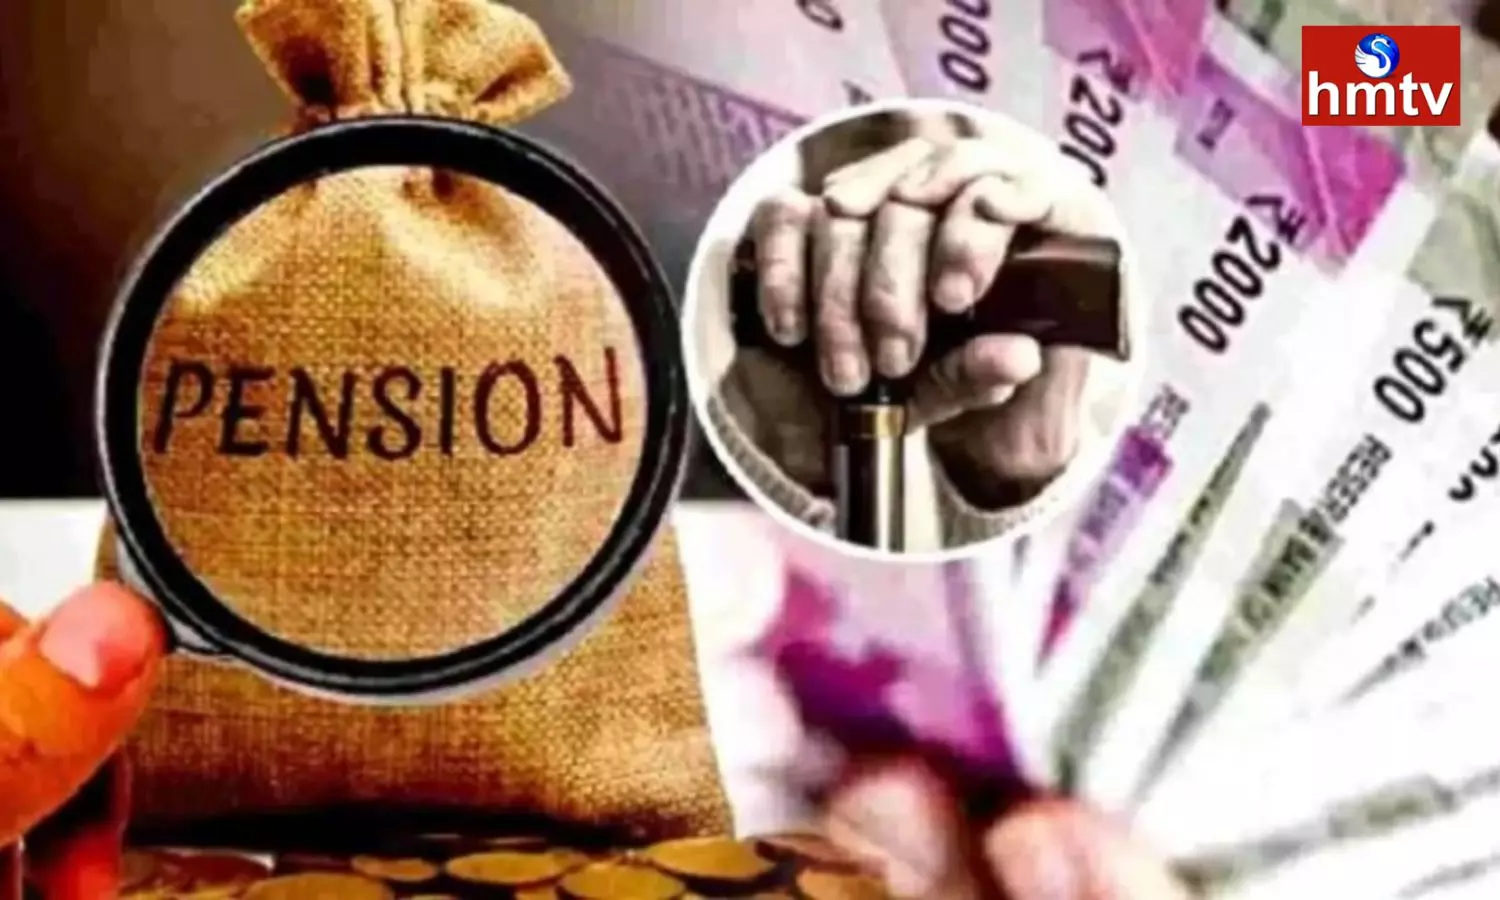 Nationwide Discussion on the Old Pension Scheme Information That it is Being Restored in Many States